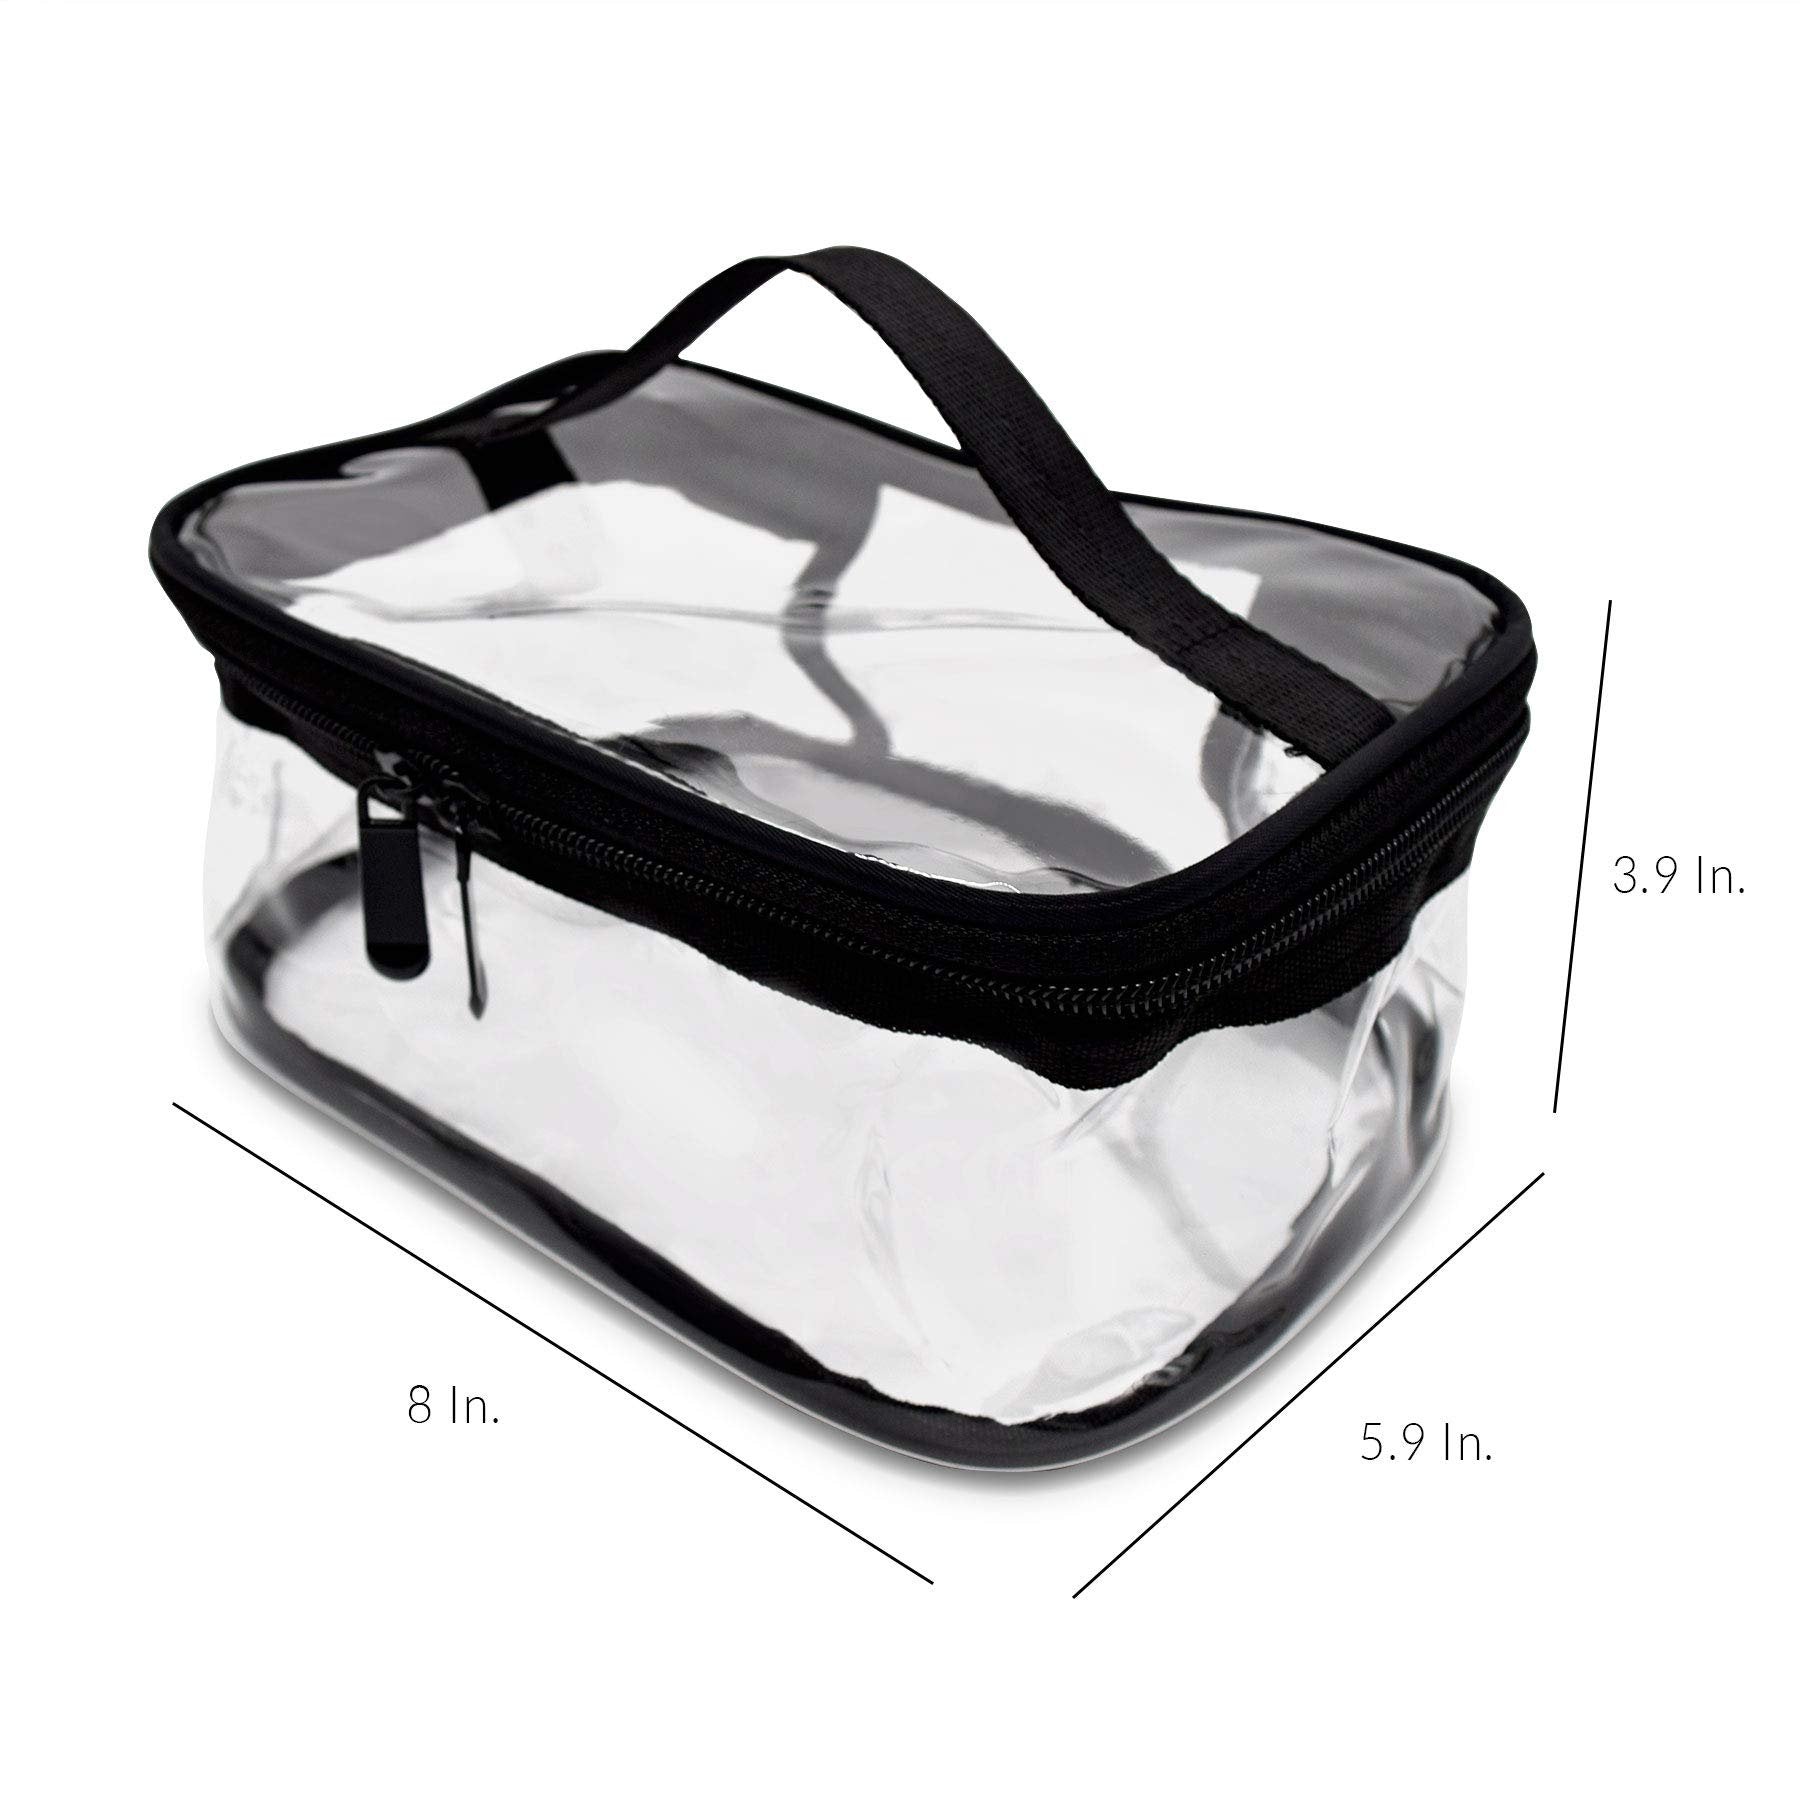 Cosmetic Travel Bag - Clear Vinyl Zipper Toiletry Pouch Portable Cosmetic Pouches Makeup Bag Multifunction Vacation Organizer Double Zippers Bathroom, Holidays, Heavy-Duty Handle Design - 8x5.9x3.9